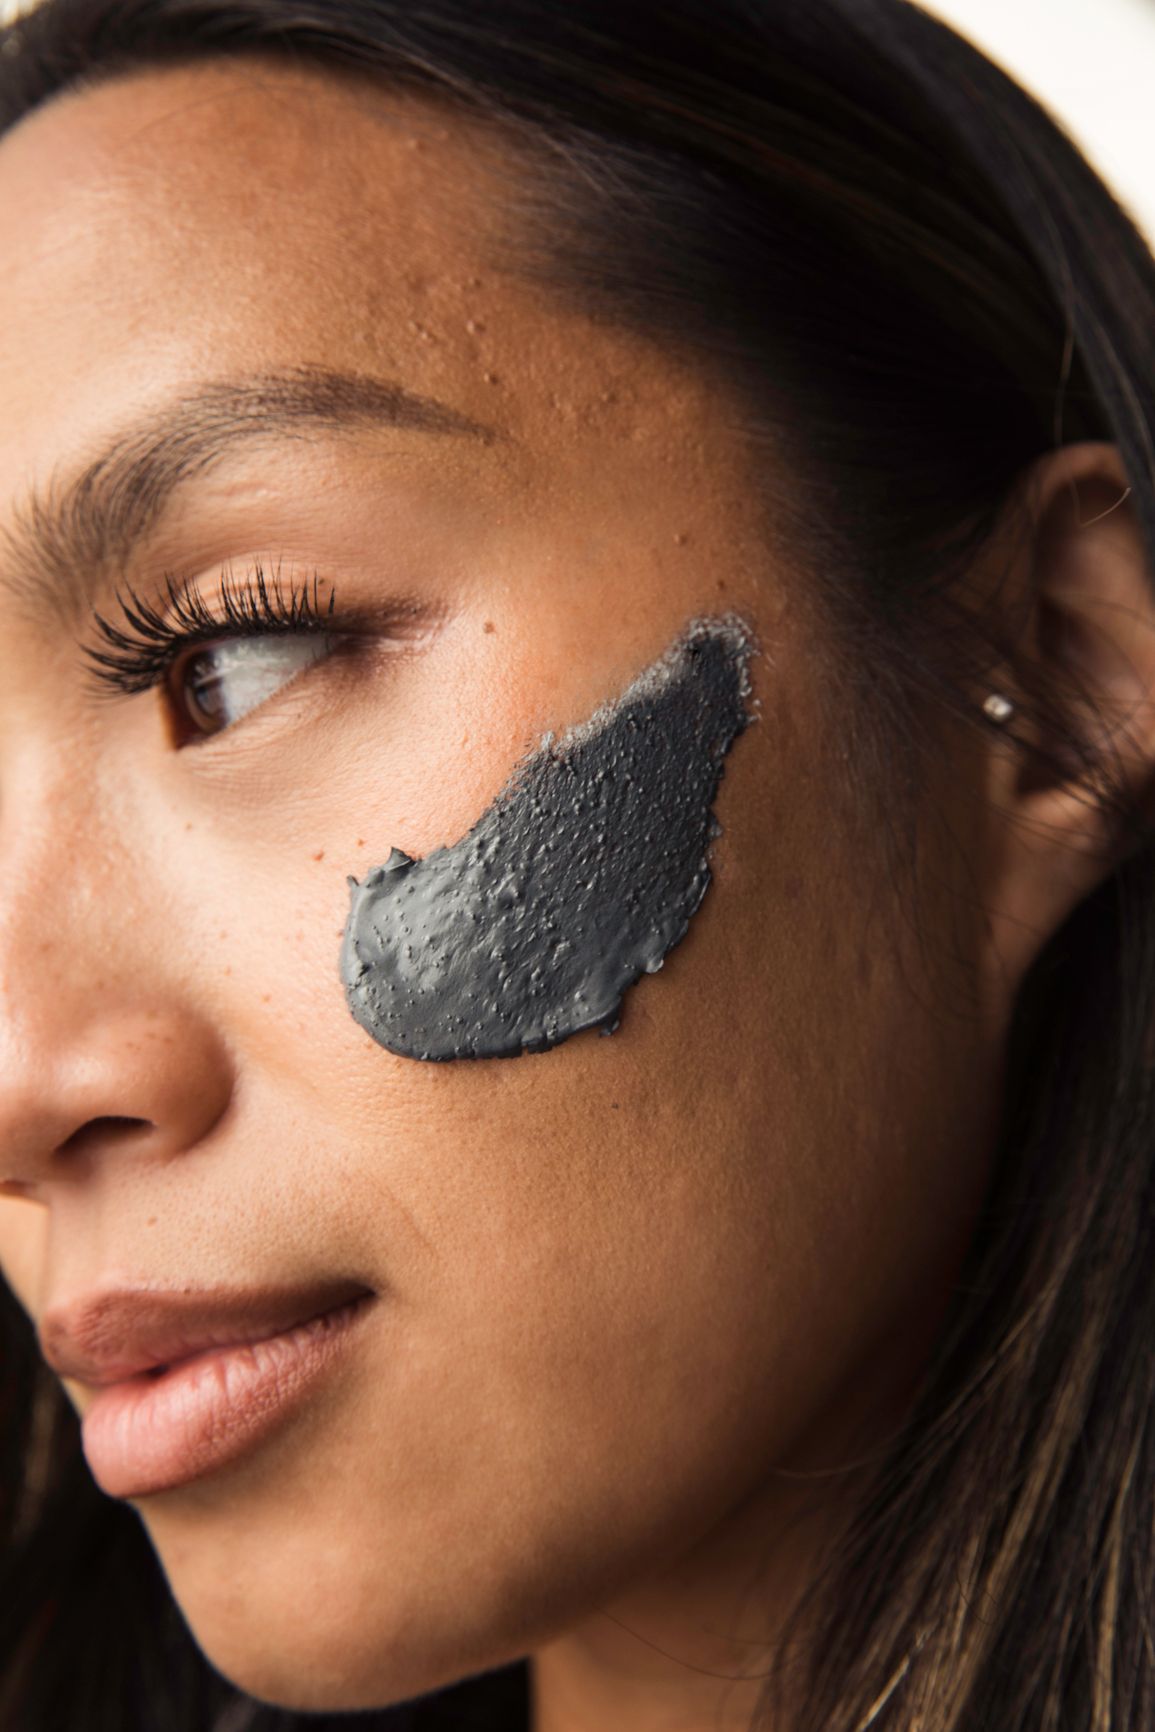 I Tried a Magnetic Face Mask to Clear My Blackheads—Here's What